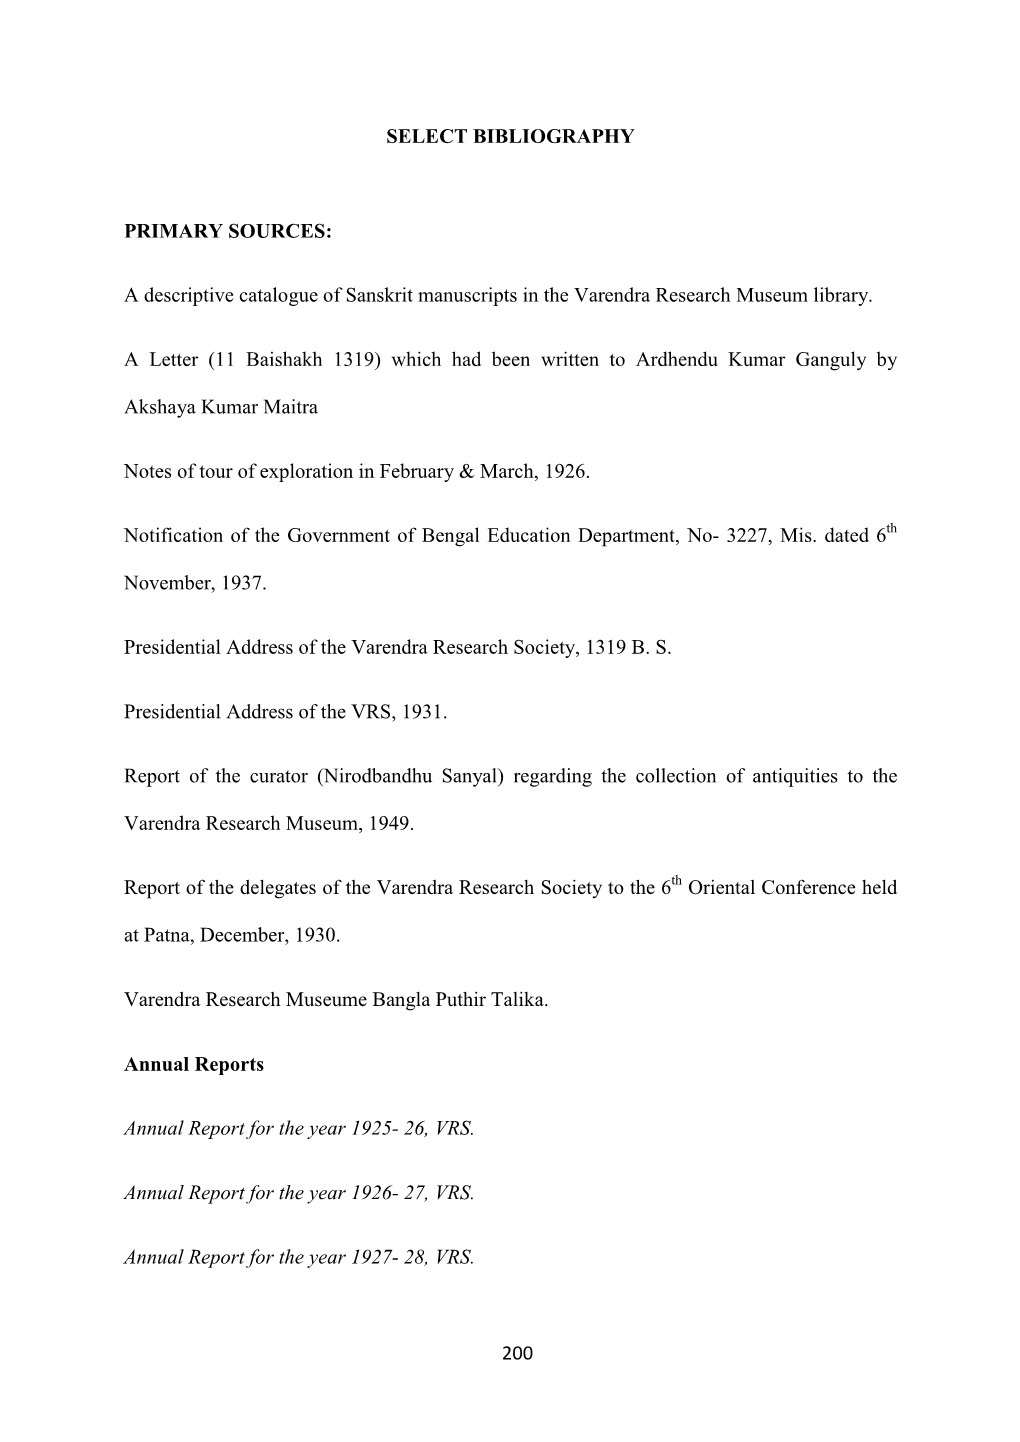 SELECT BIBLIOGRAPHY PRIMARY SOURCES: a Descriptive Catalogue of Sanskrit Manuscripts in the Varendra Research Museum Library